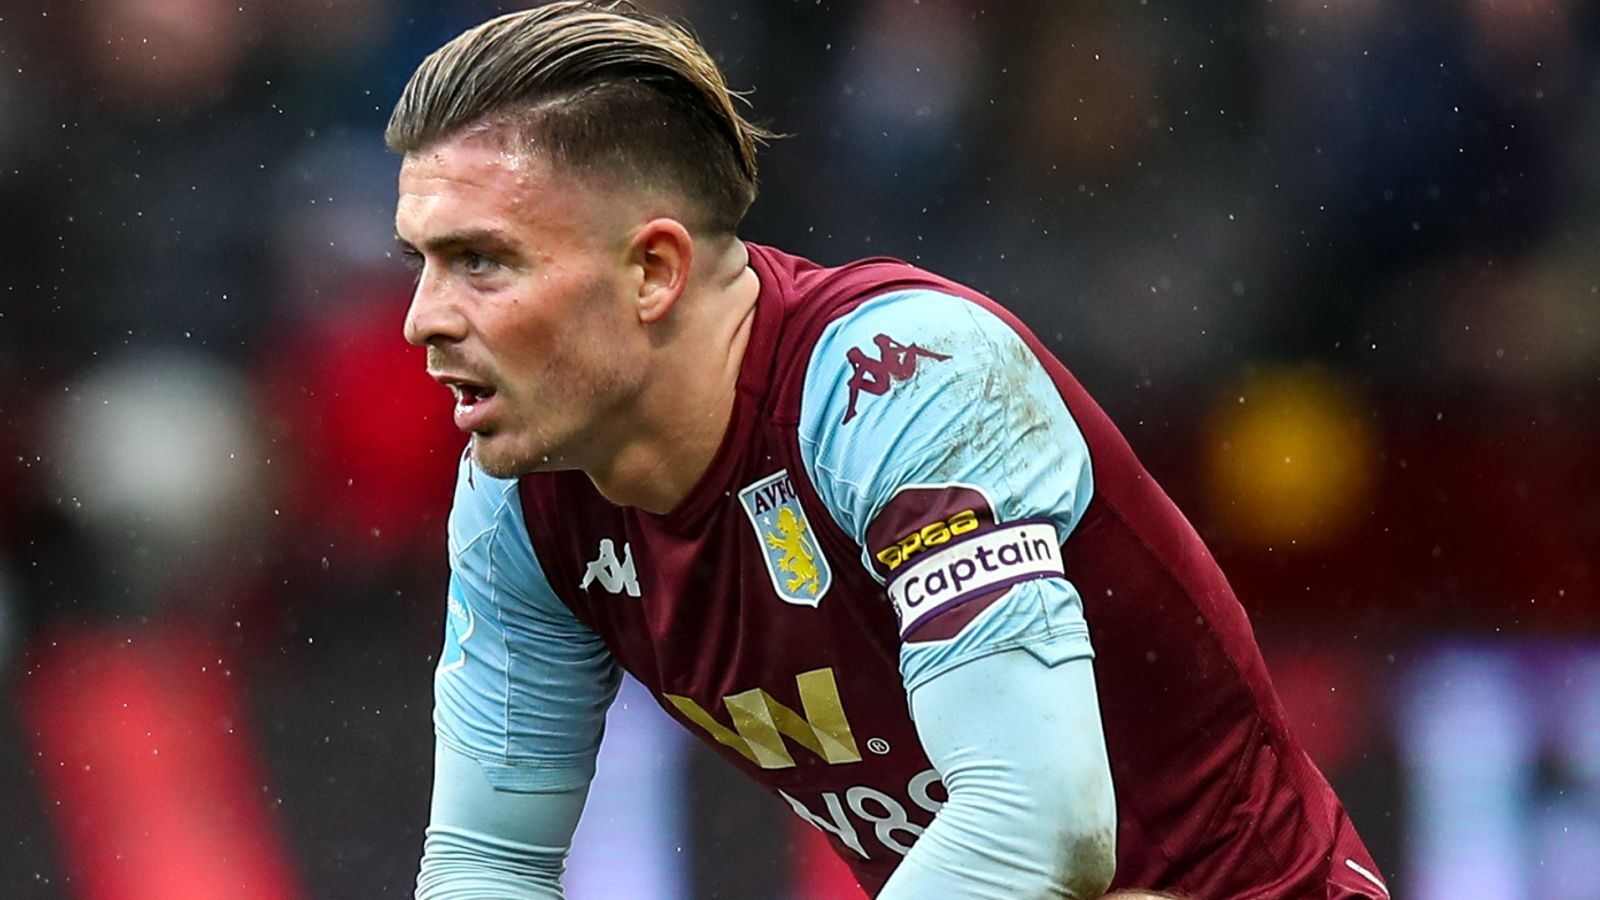 Owen: Grealish Has the Style That Fits Manchester United More Than Pogba Does